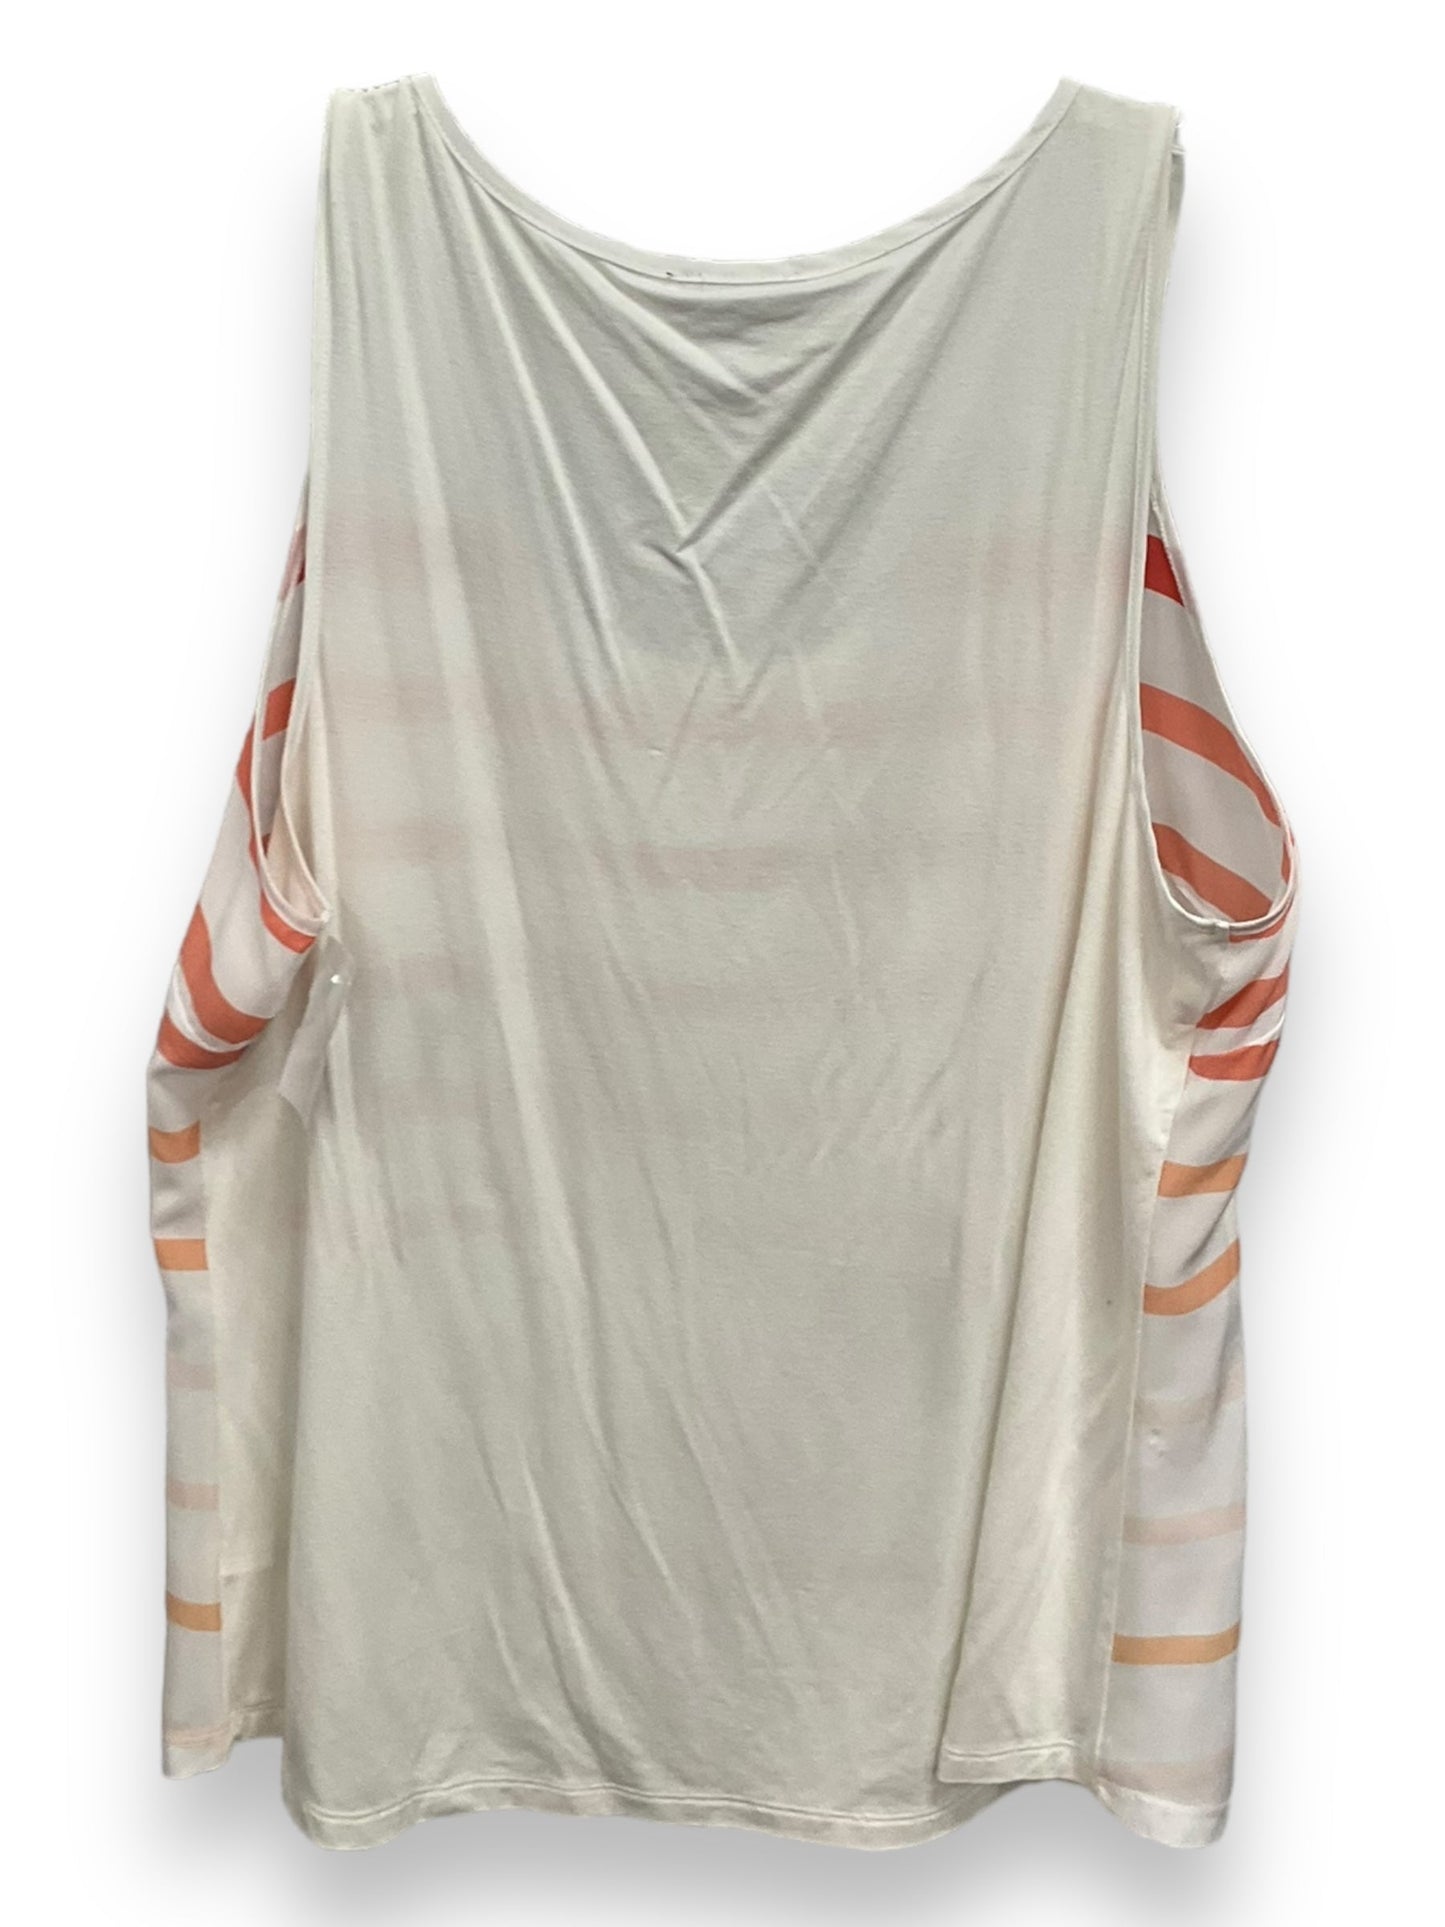 Striped Pattern Top Sleeveless Limited, Size Xl